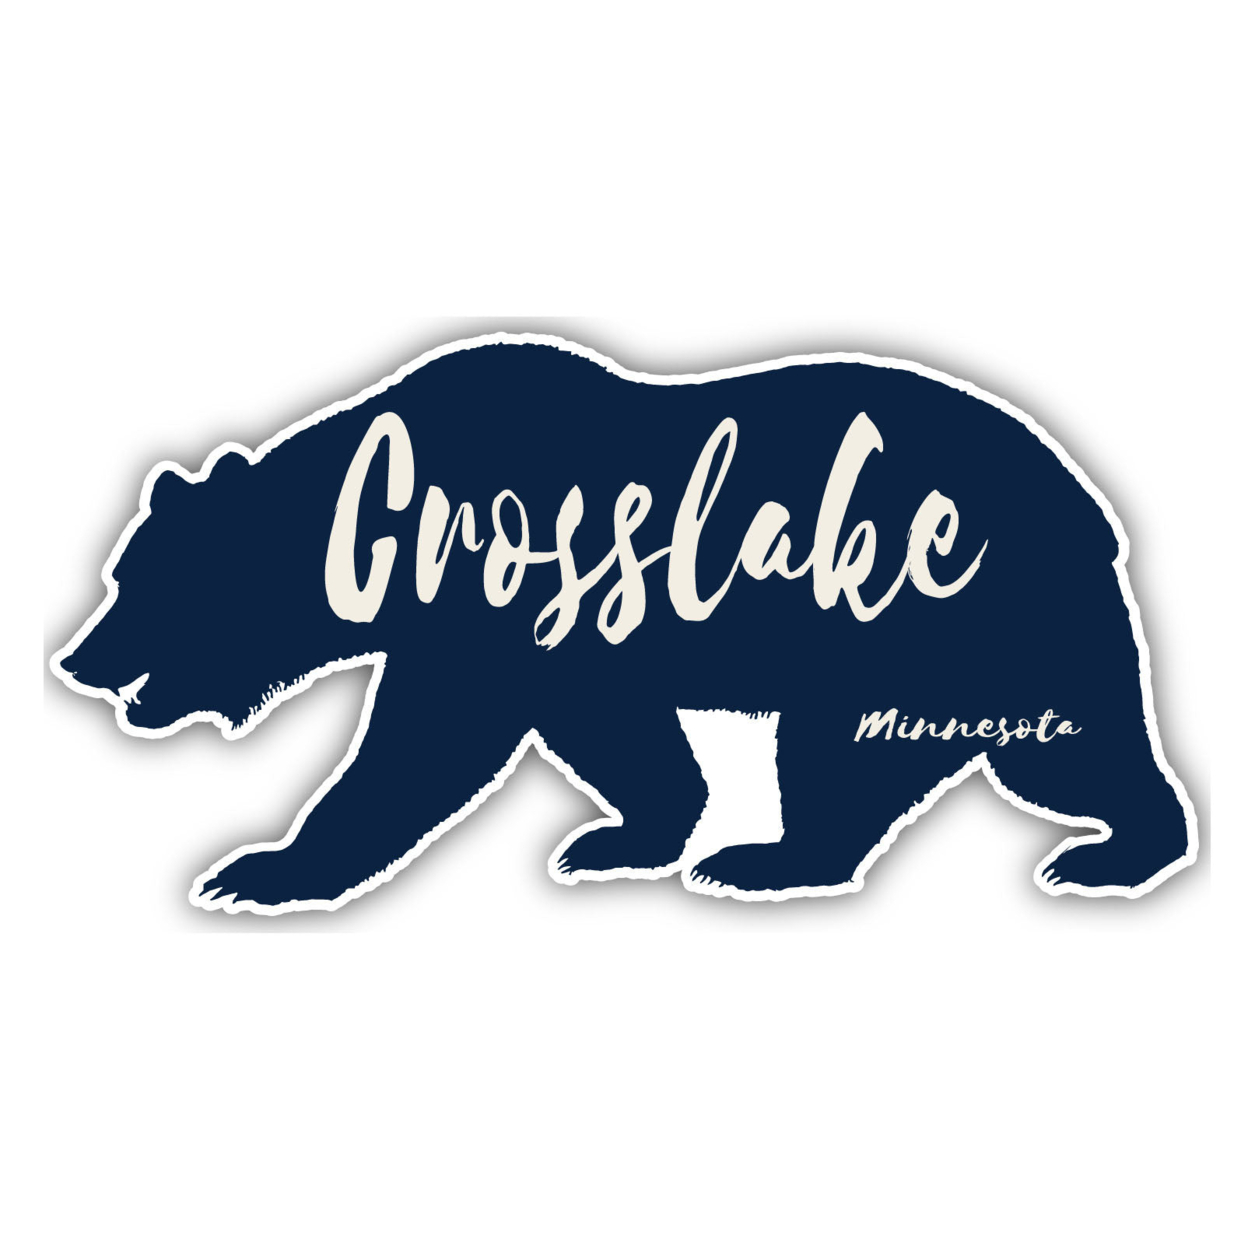 Crosslake Minnesota Souvenir Decorative Stickers (Choose Theme And Size) - 4-Pack, 10-Inch, Great Outdoors